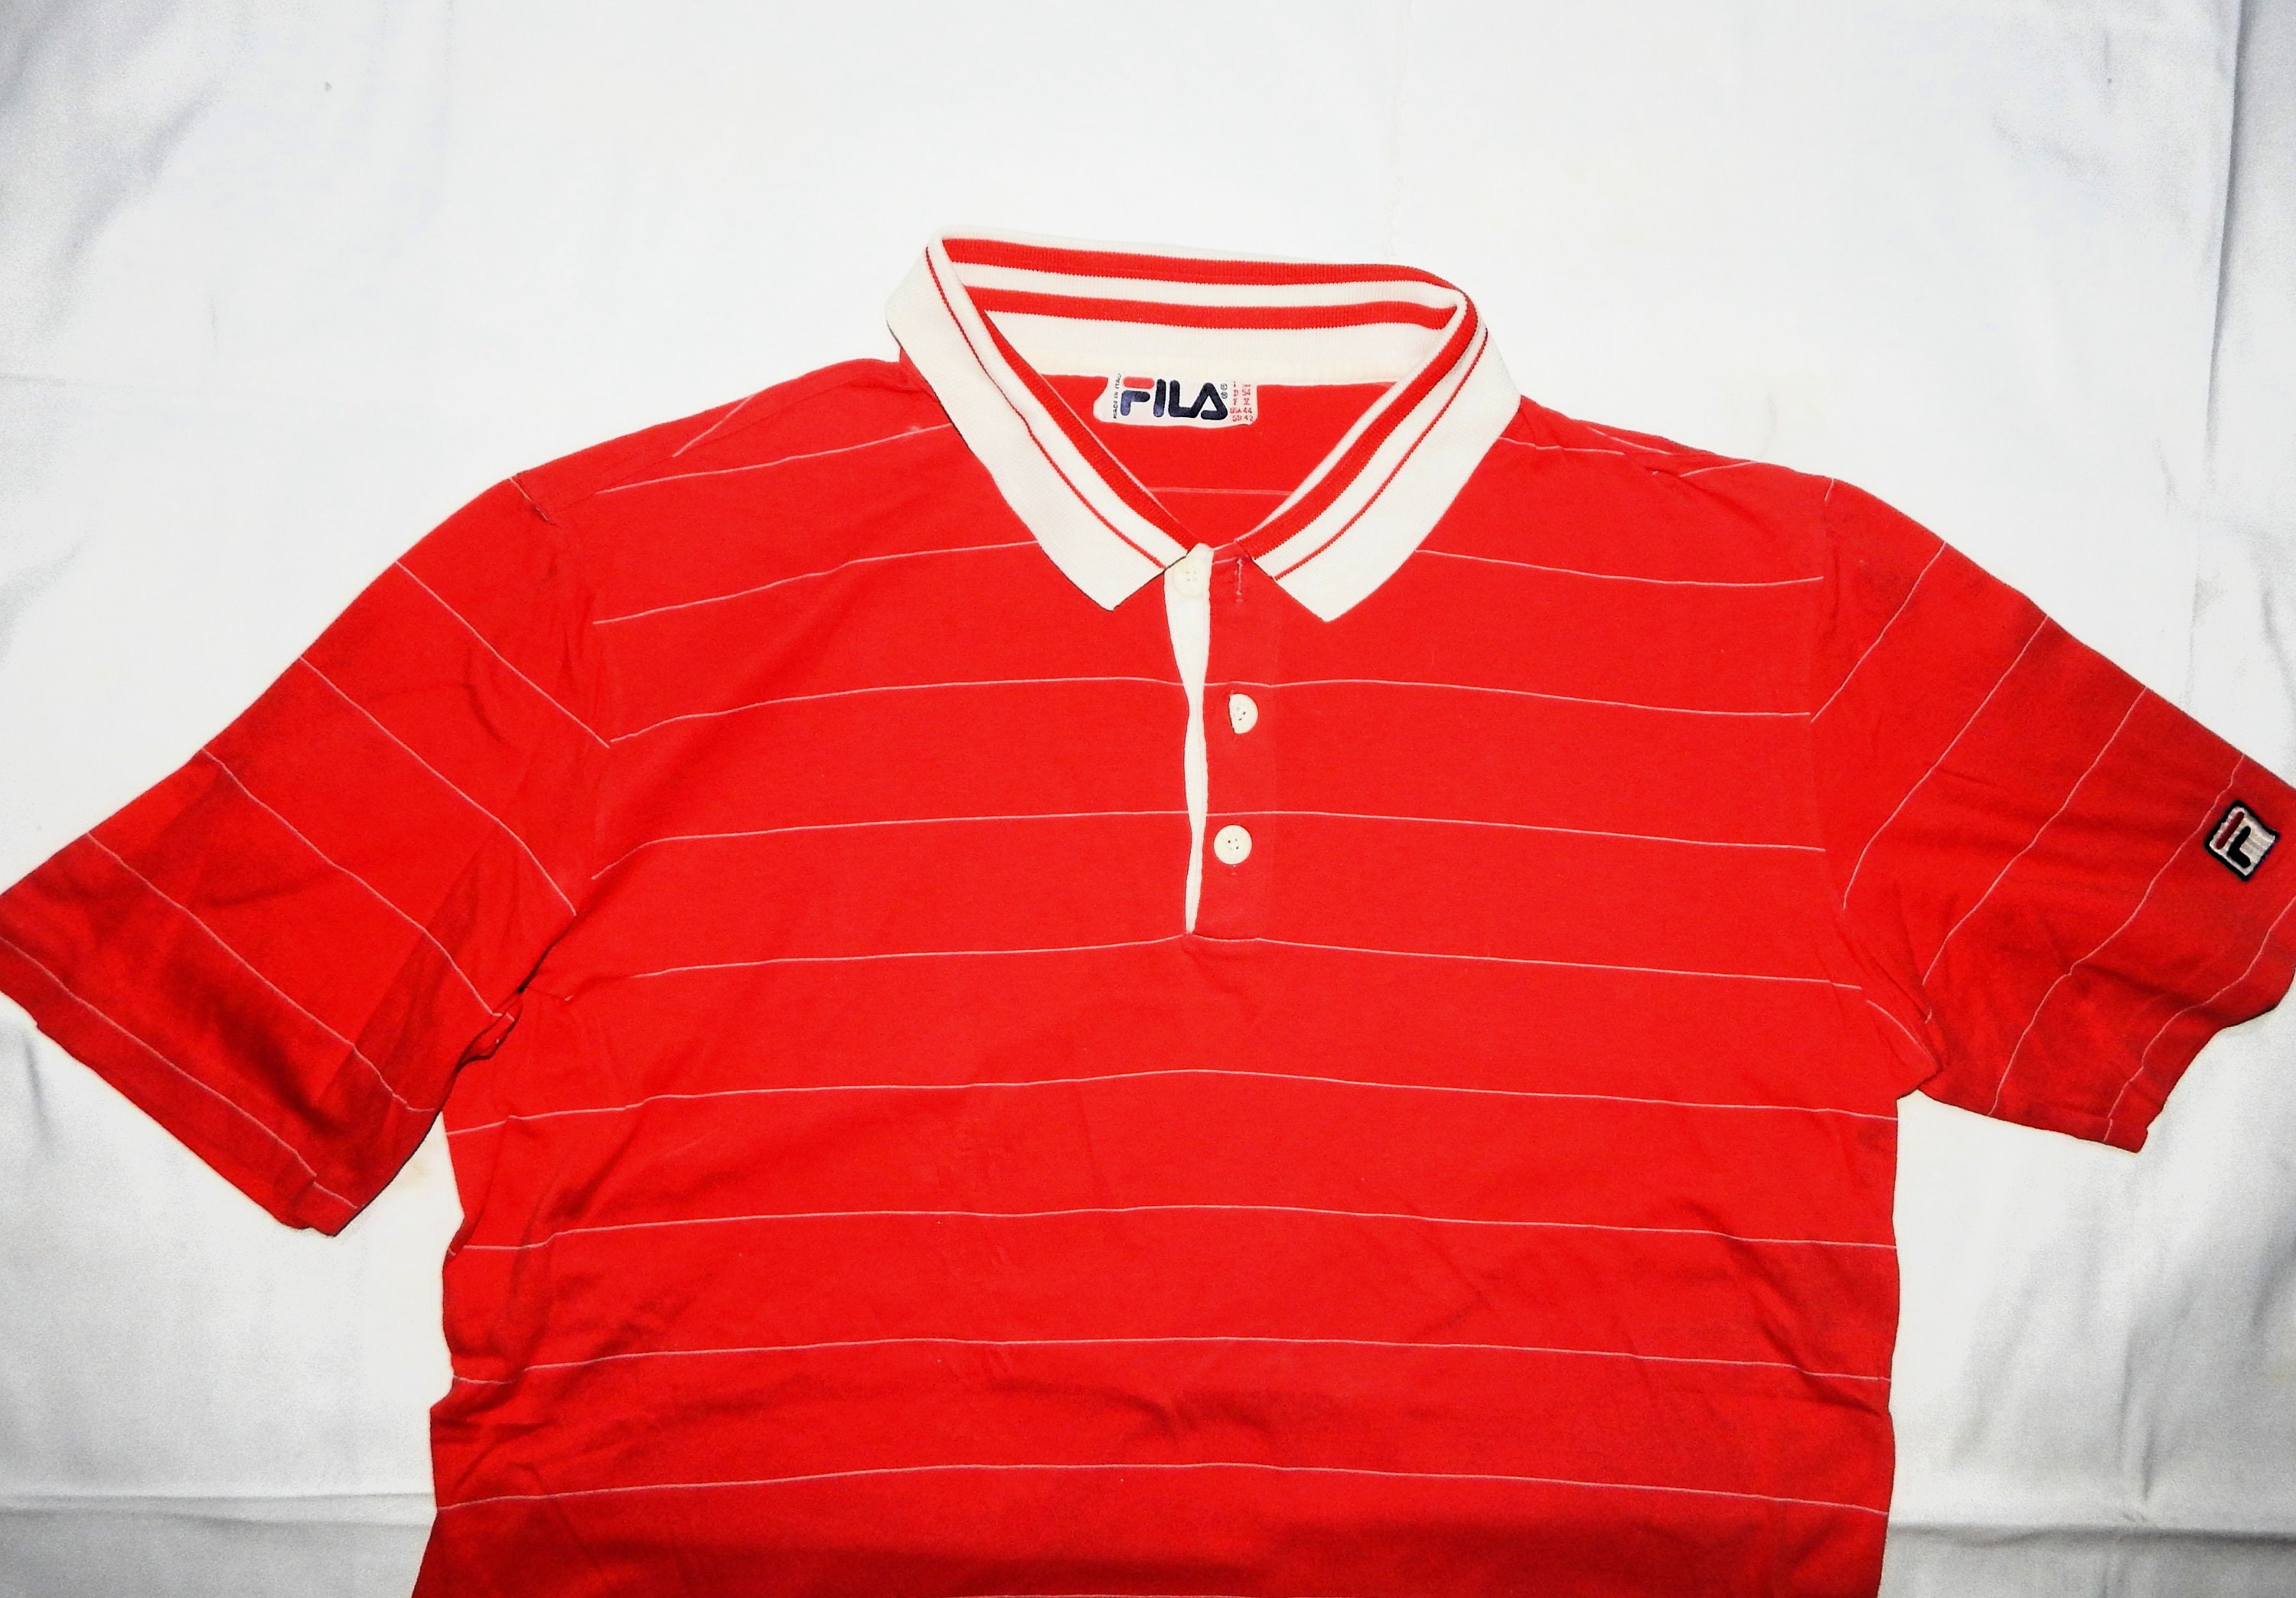 Add A Touch Of Luxury To Your Polo Game With The Fila Velour Polo Shirt -  80's Casual Classics